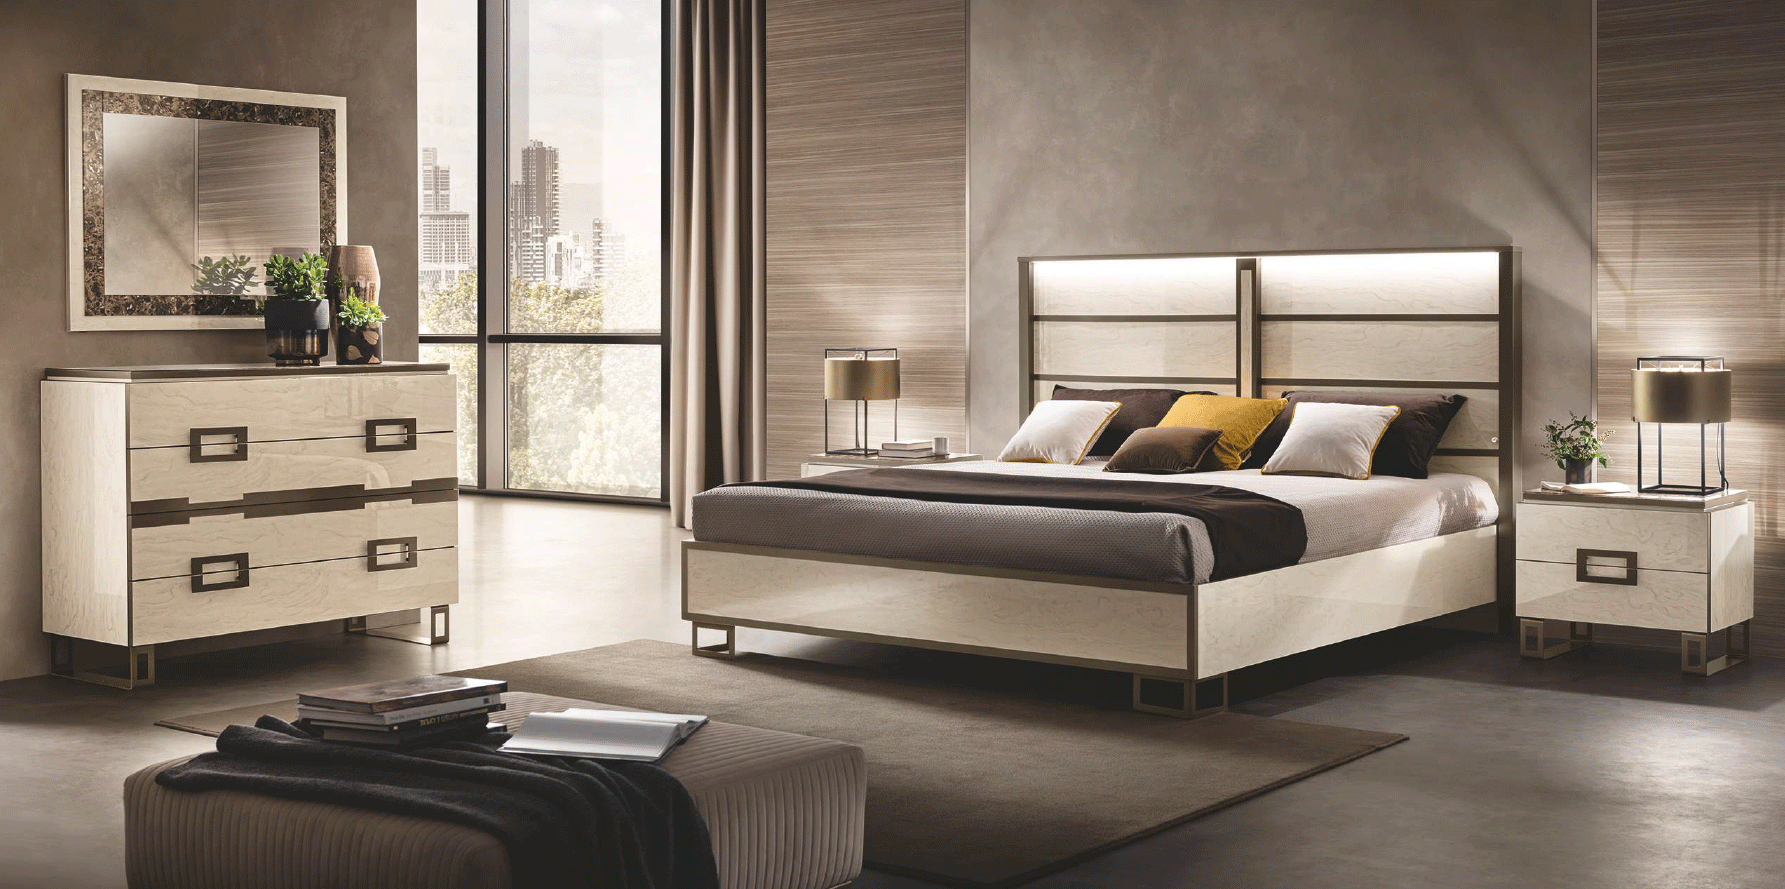 Bedroom Furniture Modern Bedrooms QS and KS Poesia Bedroom Additional items